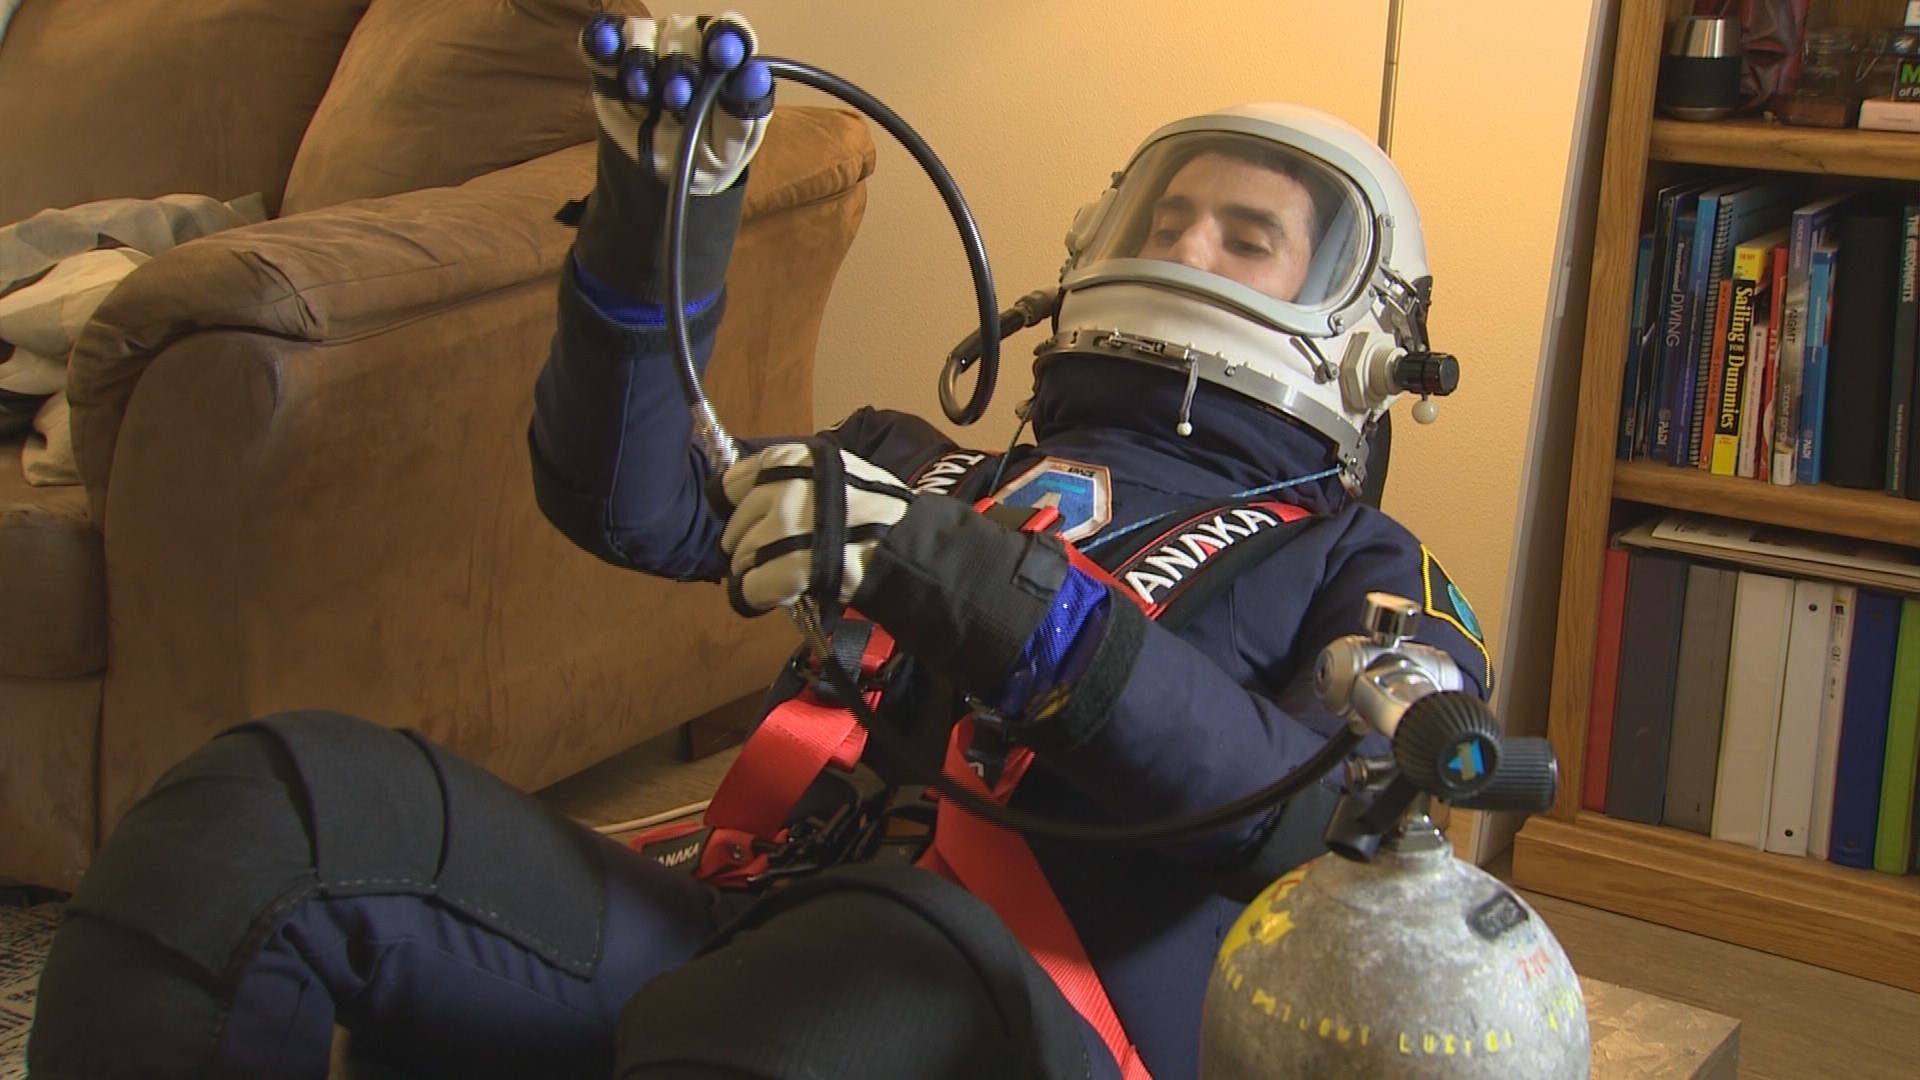 He's part of a group of amateur spacefarers  preparing to make one giant leap into space